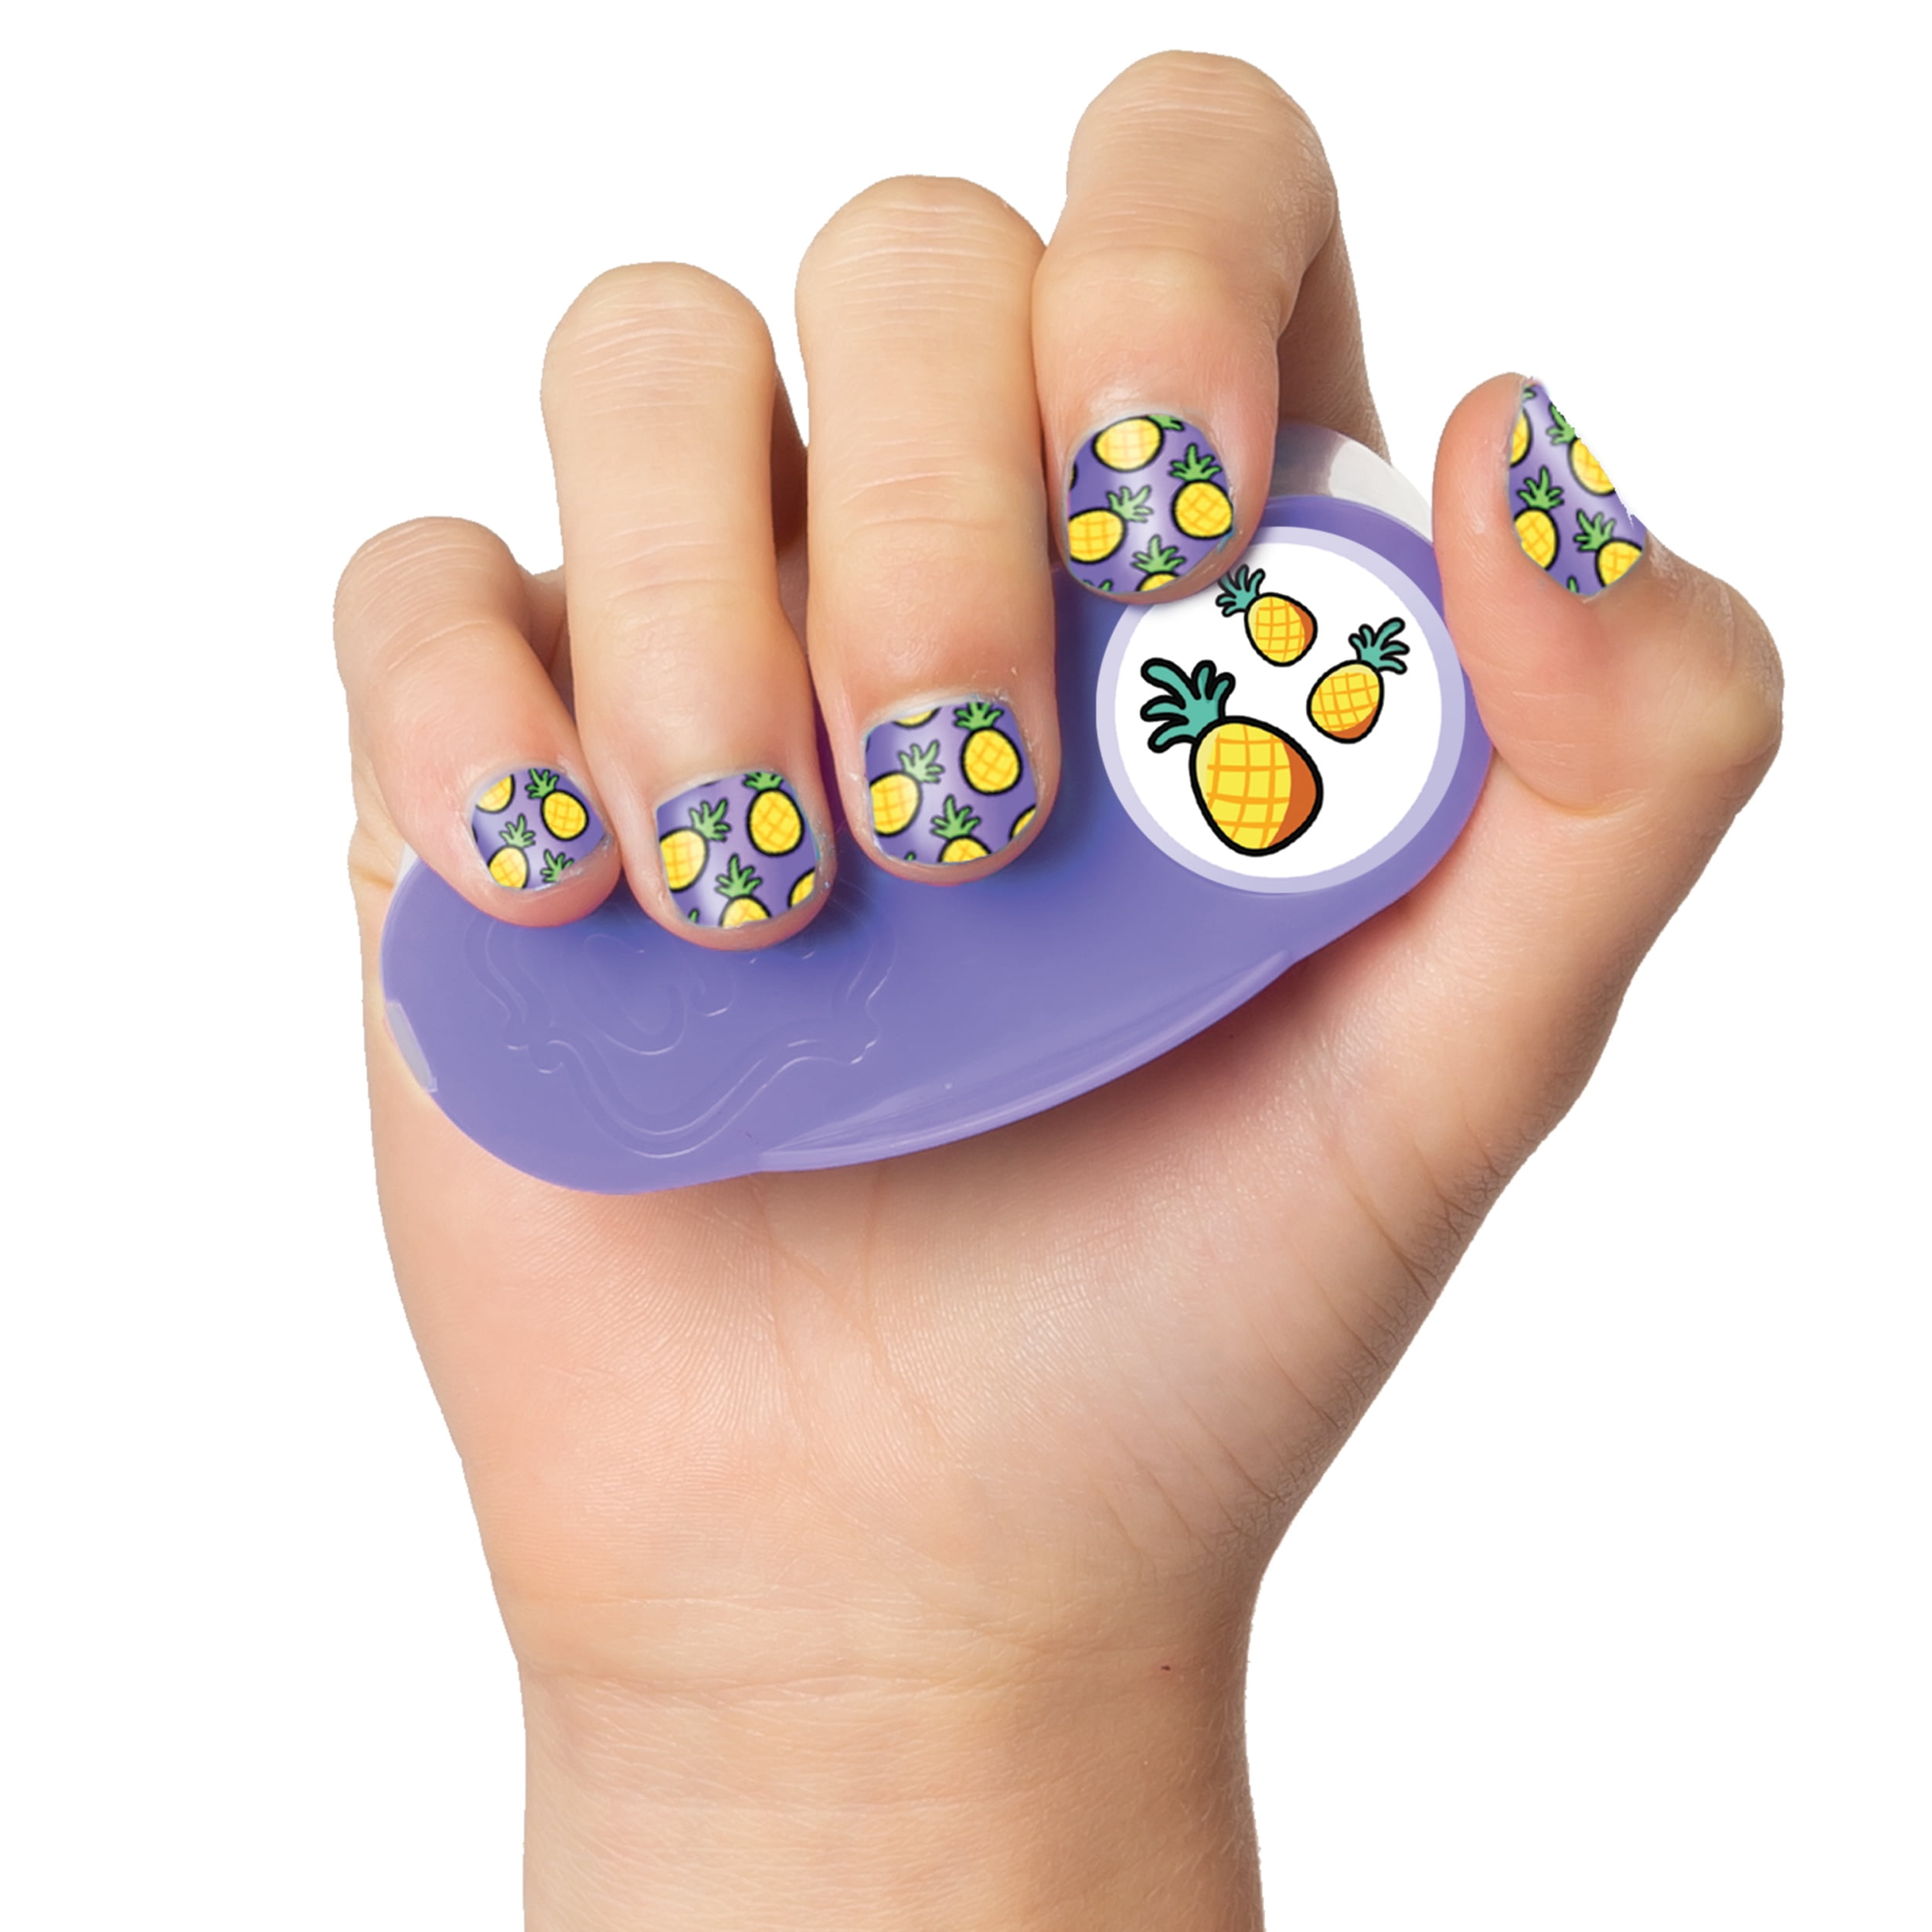 Get Glamorous Nails with Cool Maker Nail Stamper